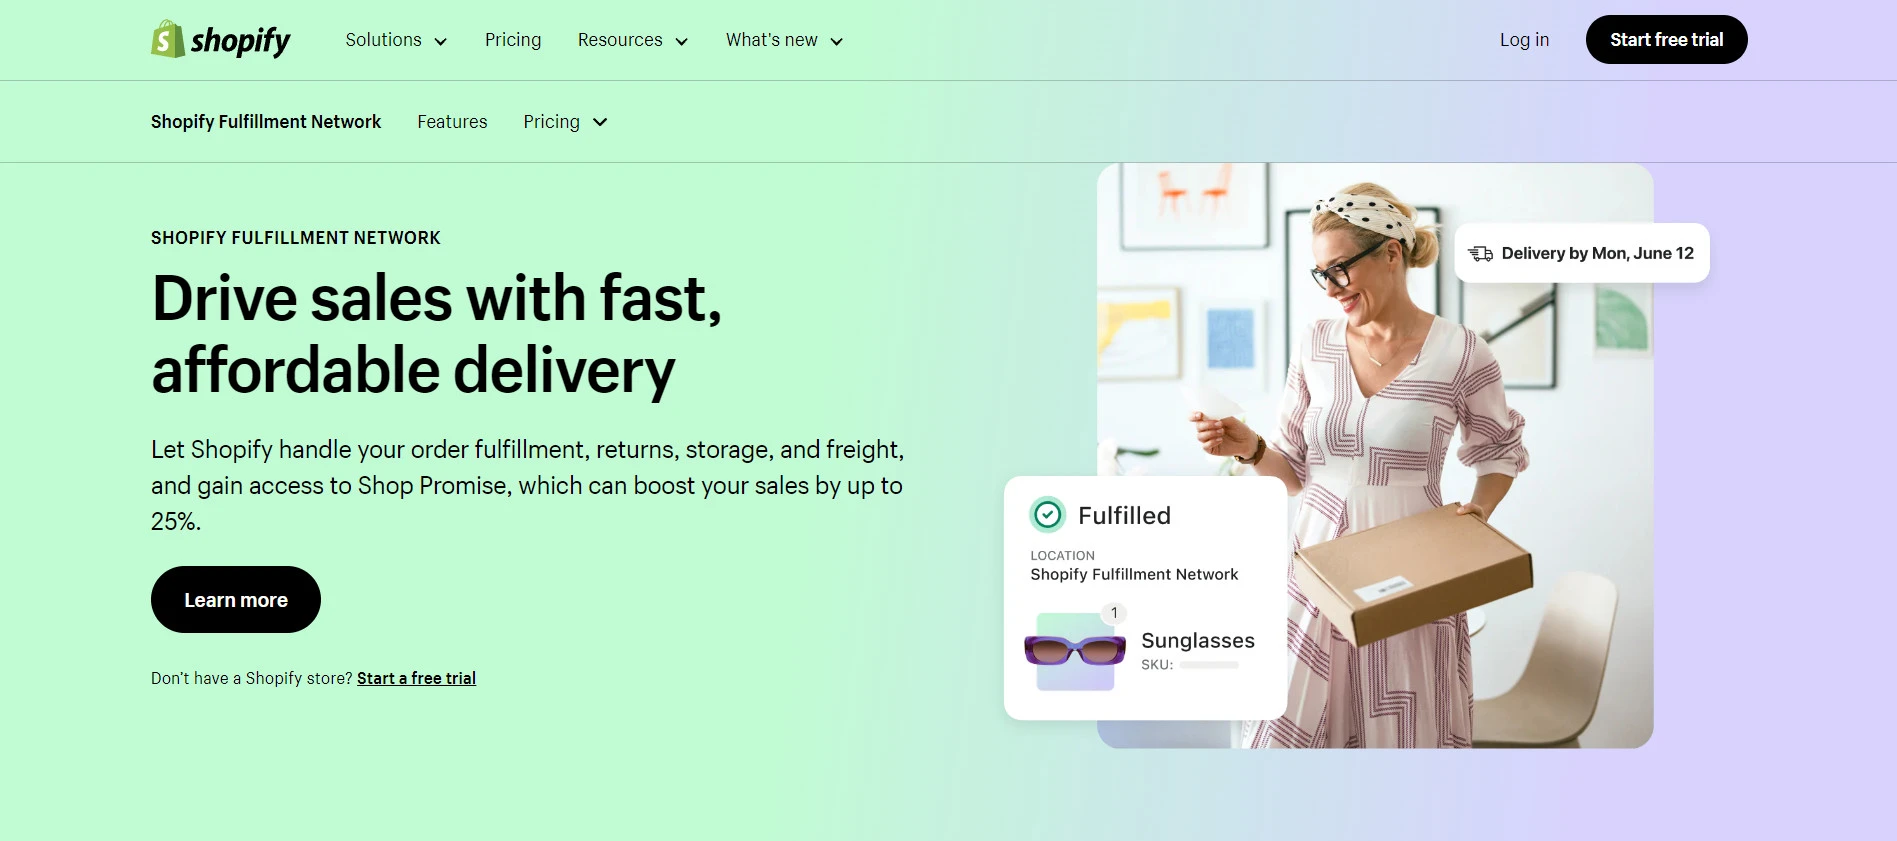 Shopify Fulfillment Network homepage